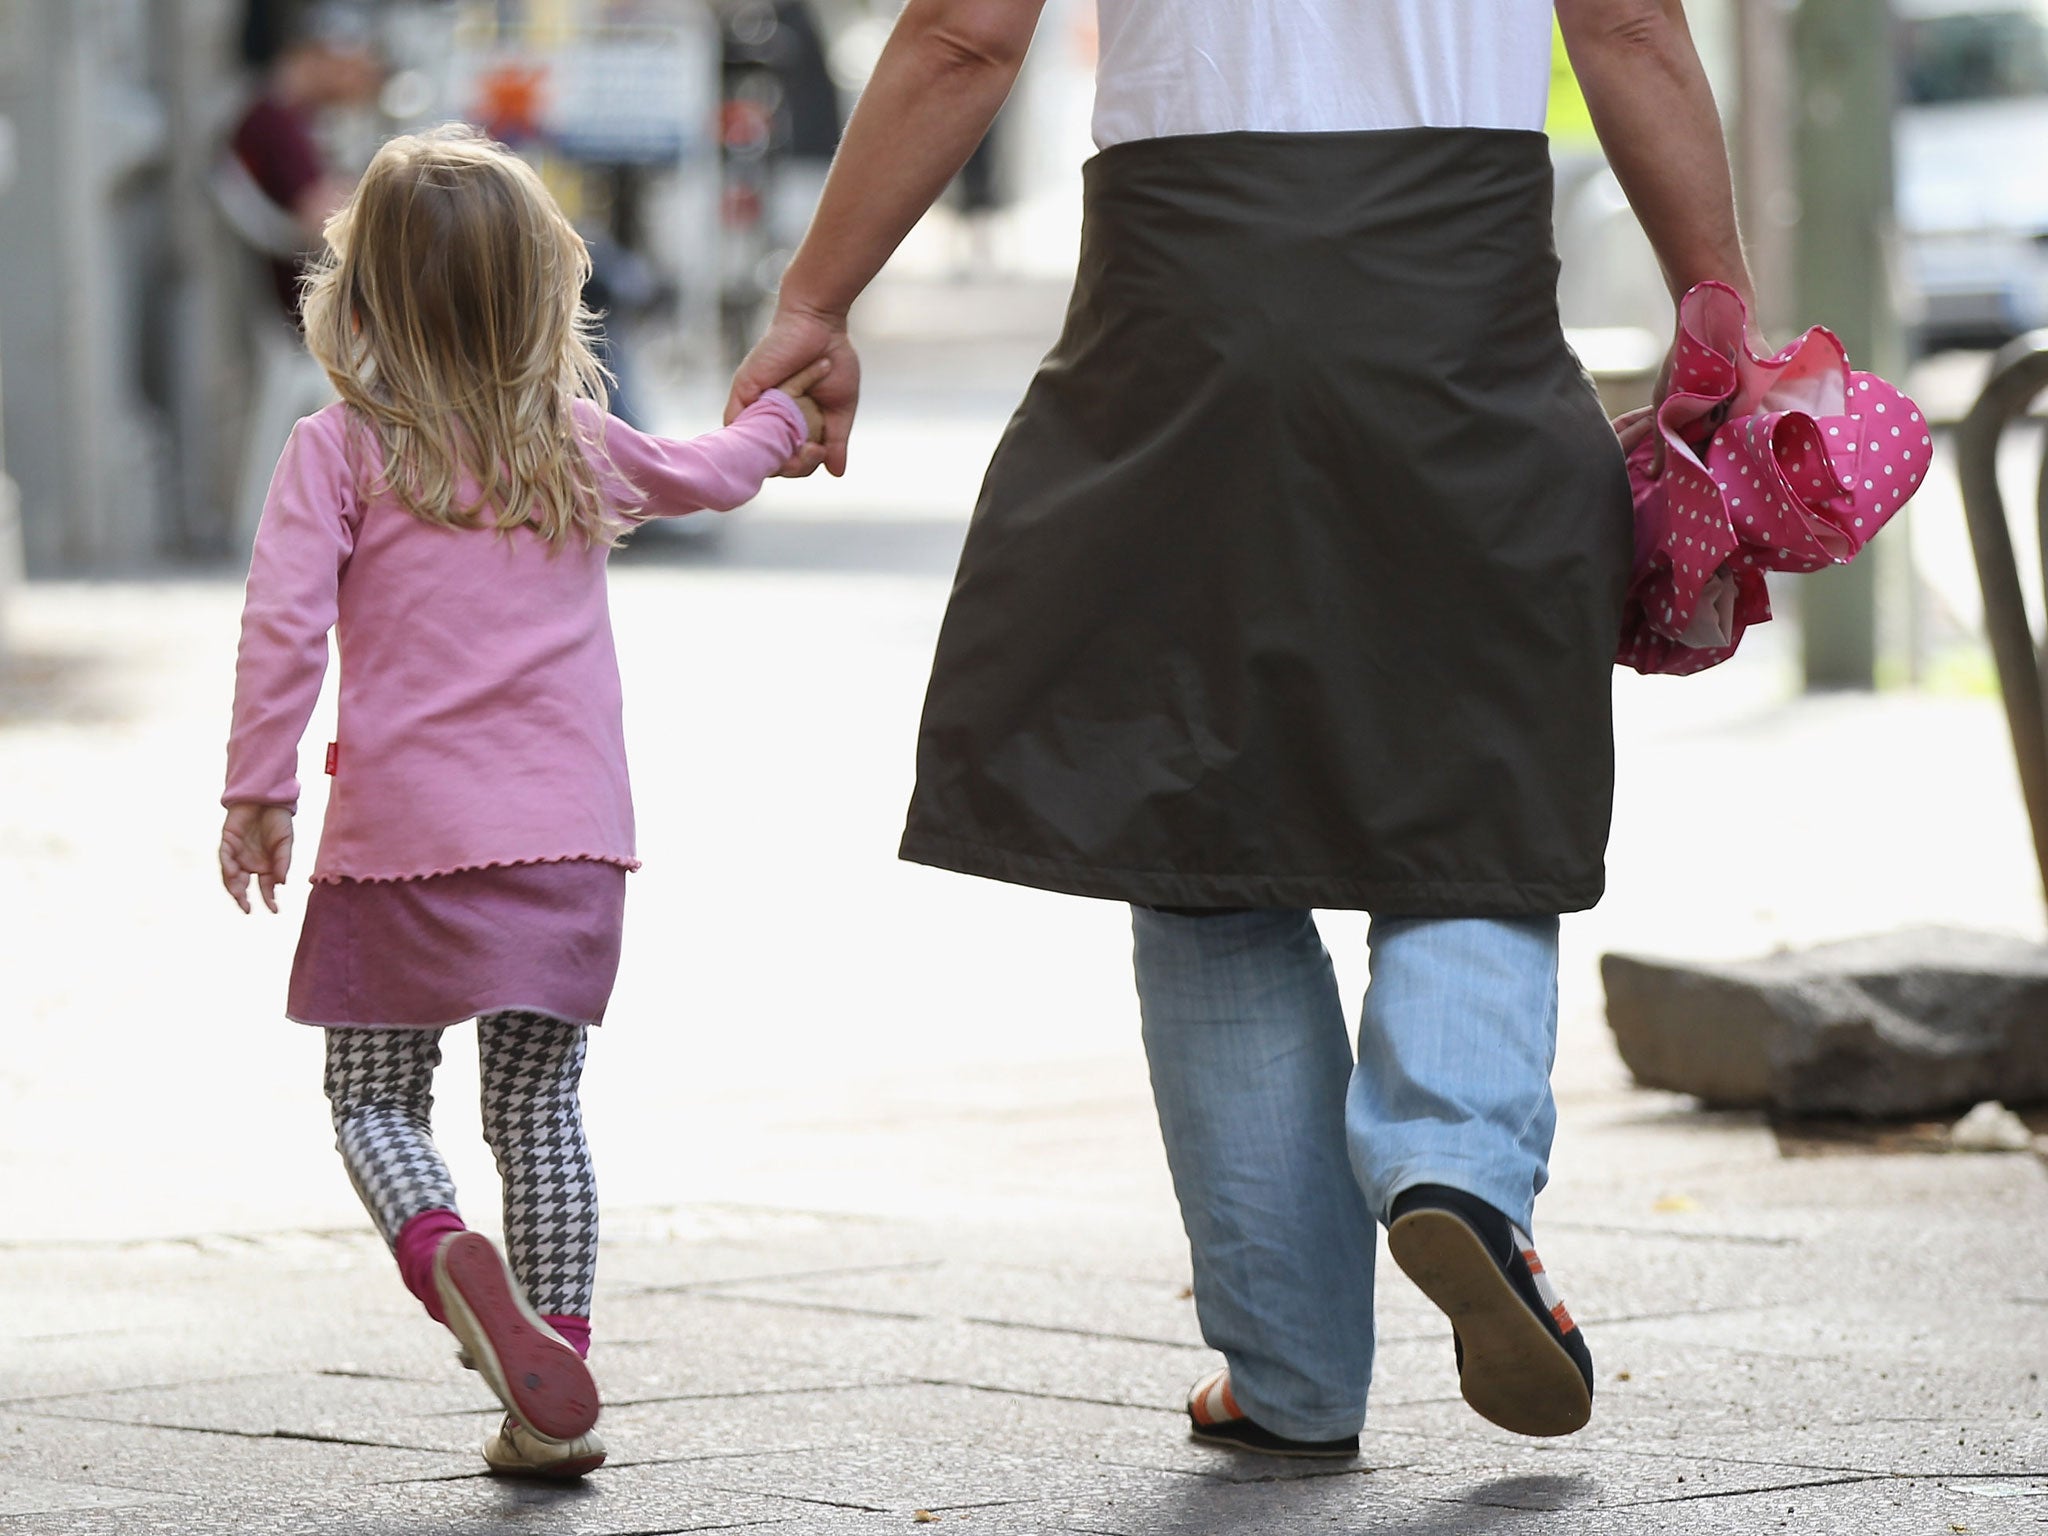 A father and daughter walk in the city center on July 17, 2012 in Berlin, Germany.